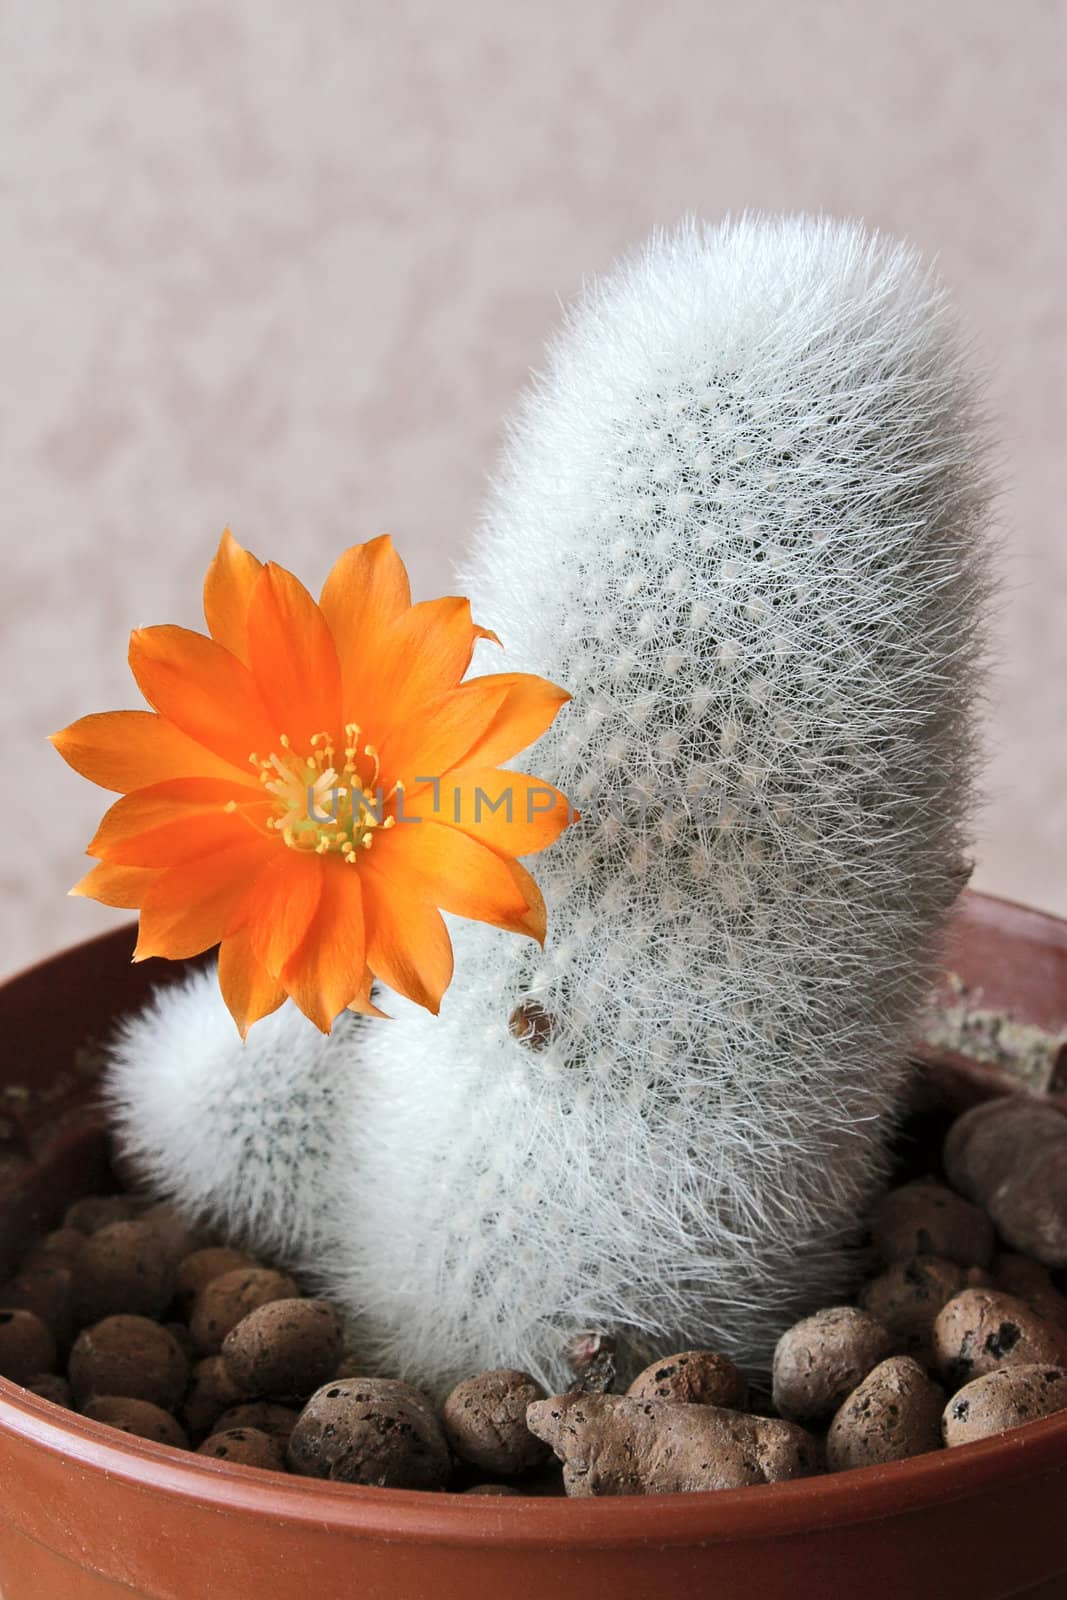 Blooming cactus on dark background (Aylostera).Image with shallow depth of field.